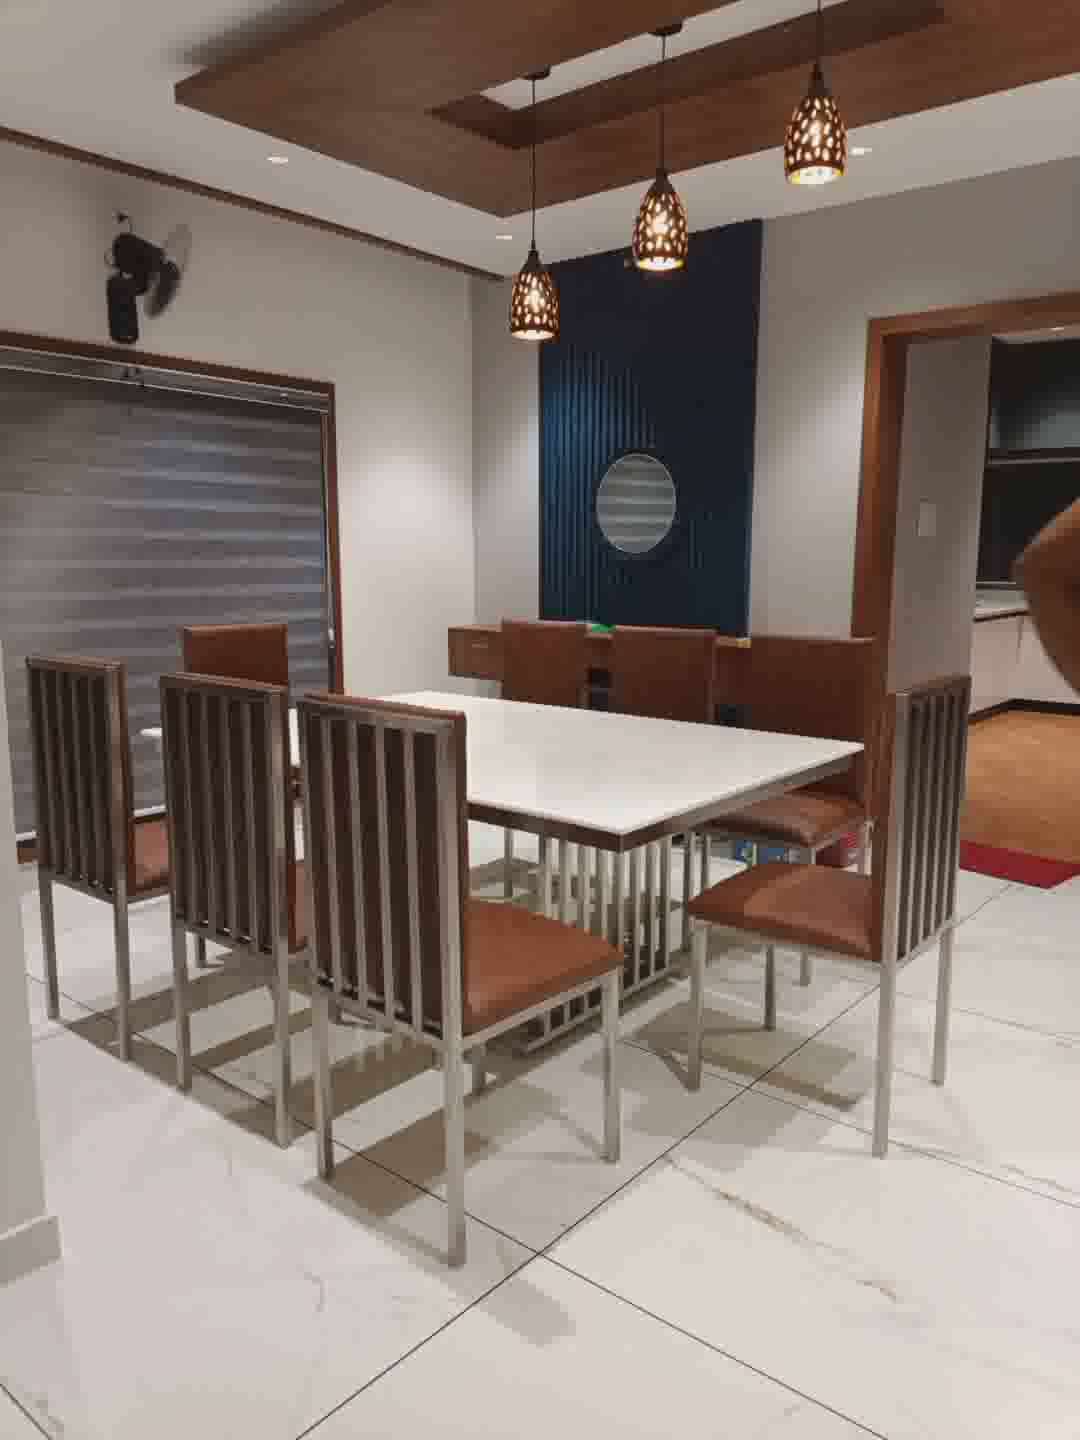 8 seater dinning table free delivery any where in kerala 304, 18gauge stainless steel, nano white artificial granite, italian model dinning chair available #stainless #StainlessSteelfurniture #stainless-steel #furnitures #DiningChairs #DiningTable